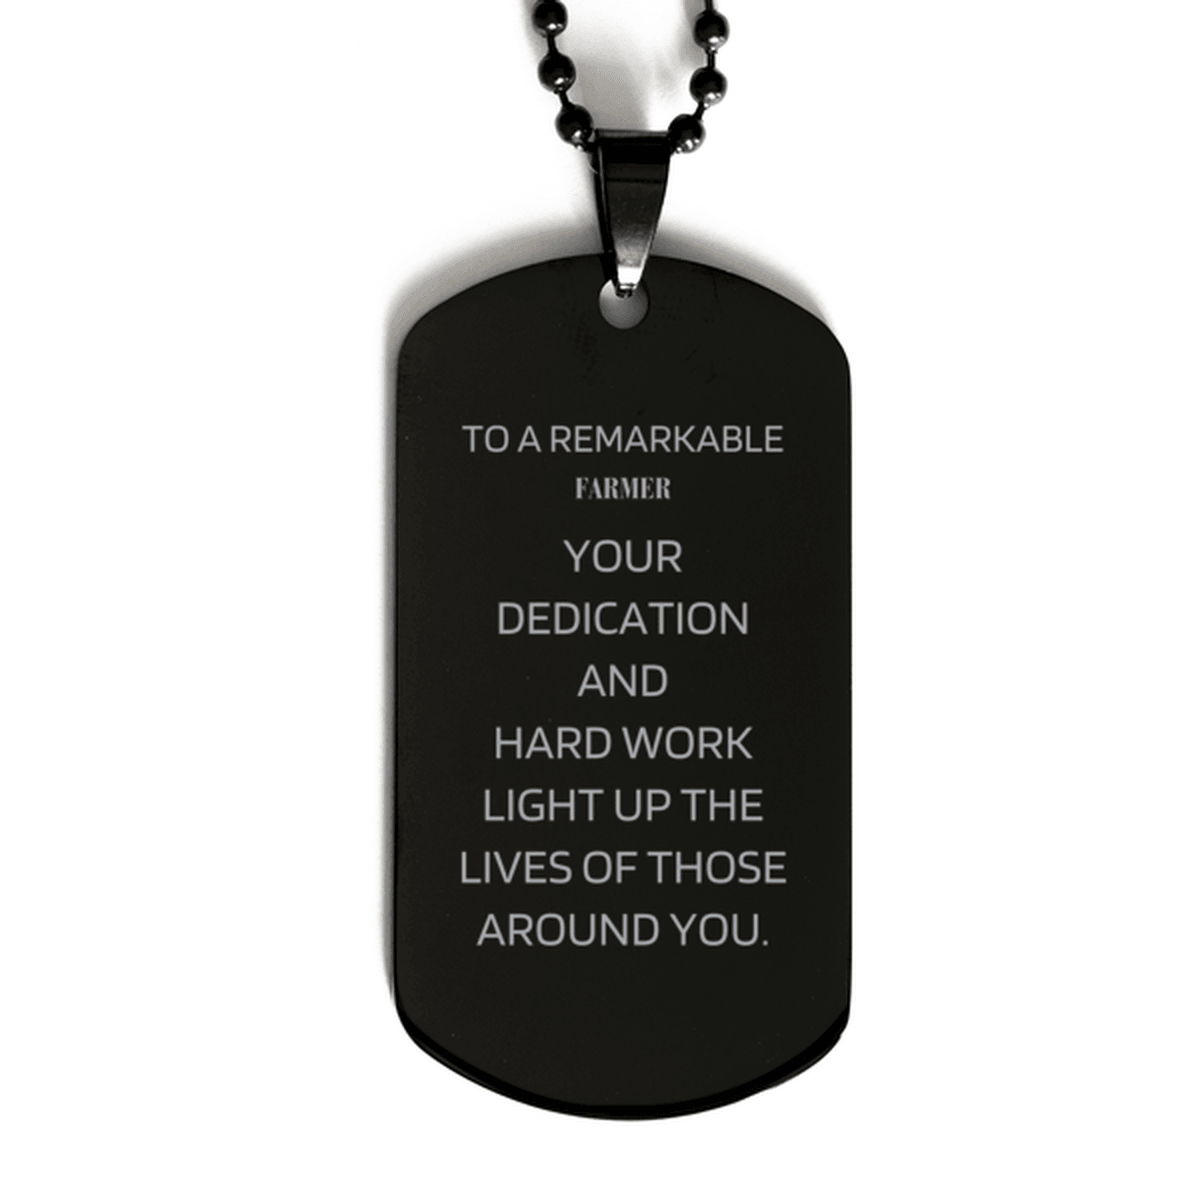 Remarkable Farmer Gifts, Your dedication and hard work, Inspirational Birthday Christmas Unique Black Dog Tag For Farmer, Coworkers, Men, Women, Friends - Mallard Moon Gift Shop